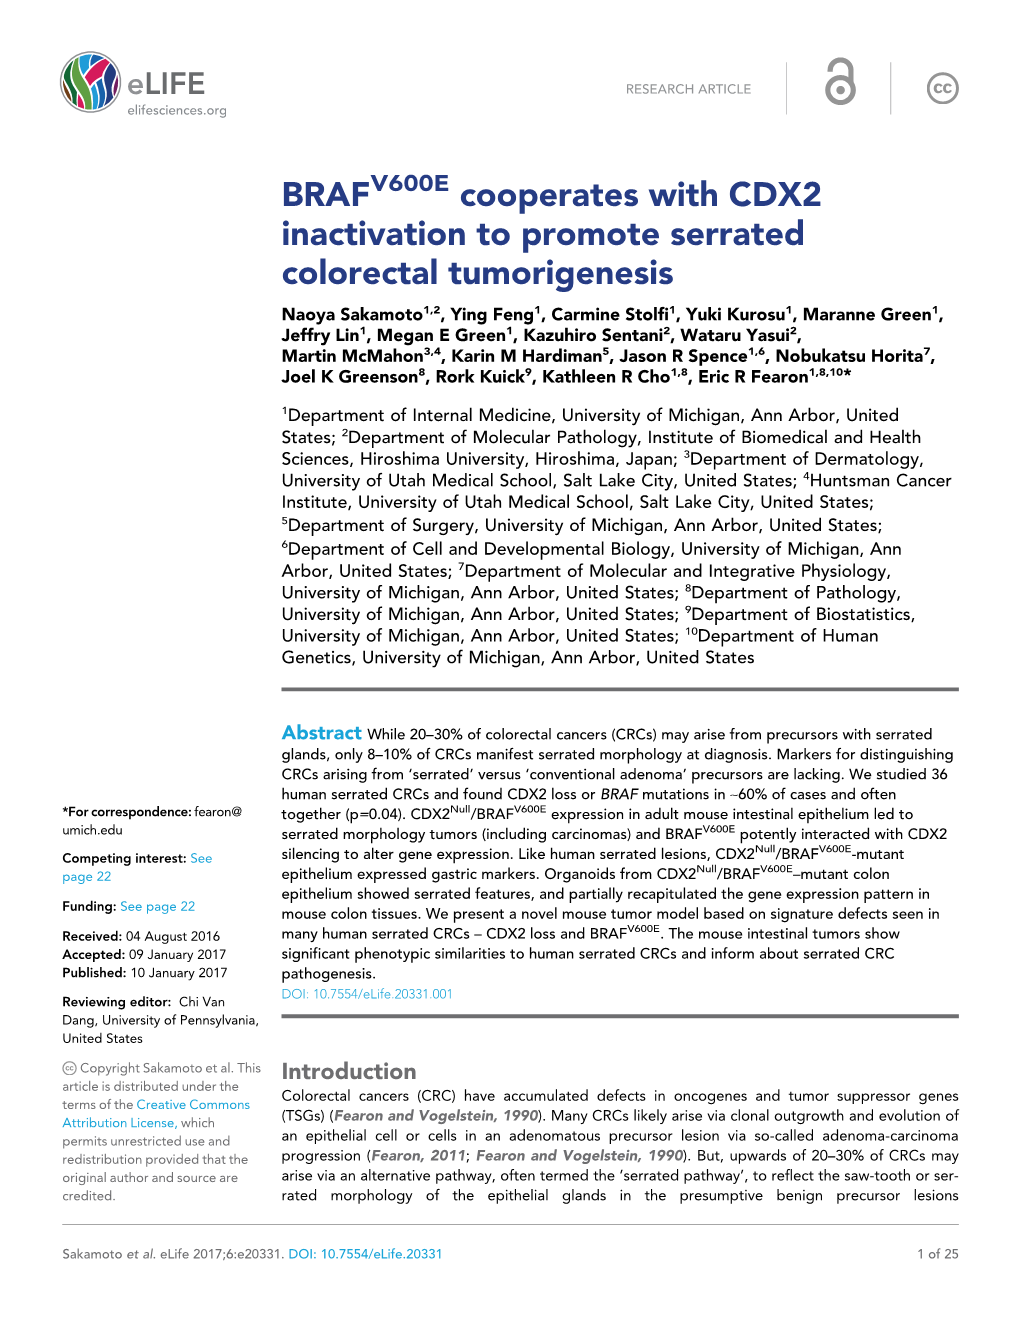 BRAF Cooperates with CDX2 Inactivation to Promote Serrated